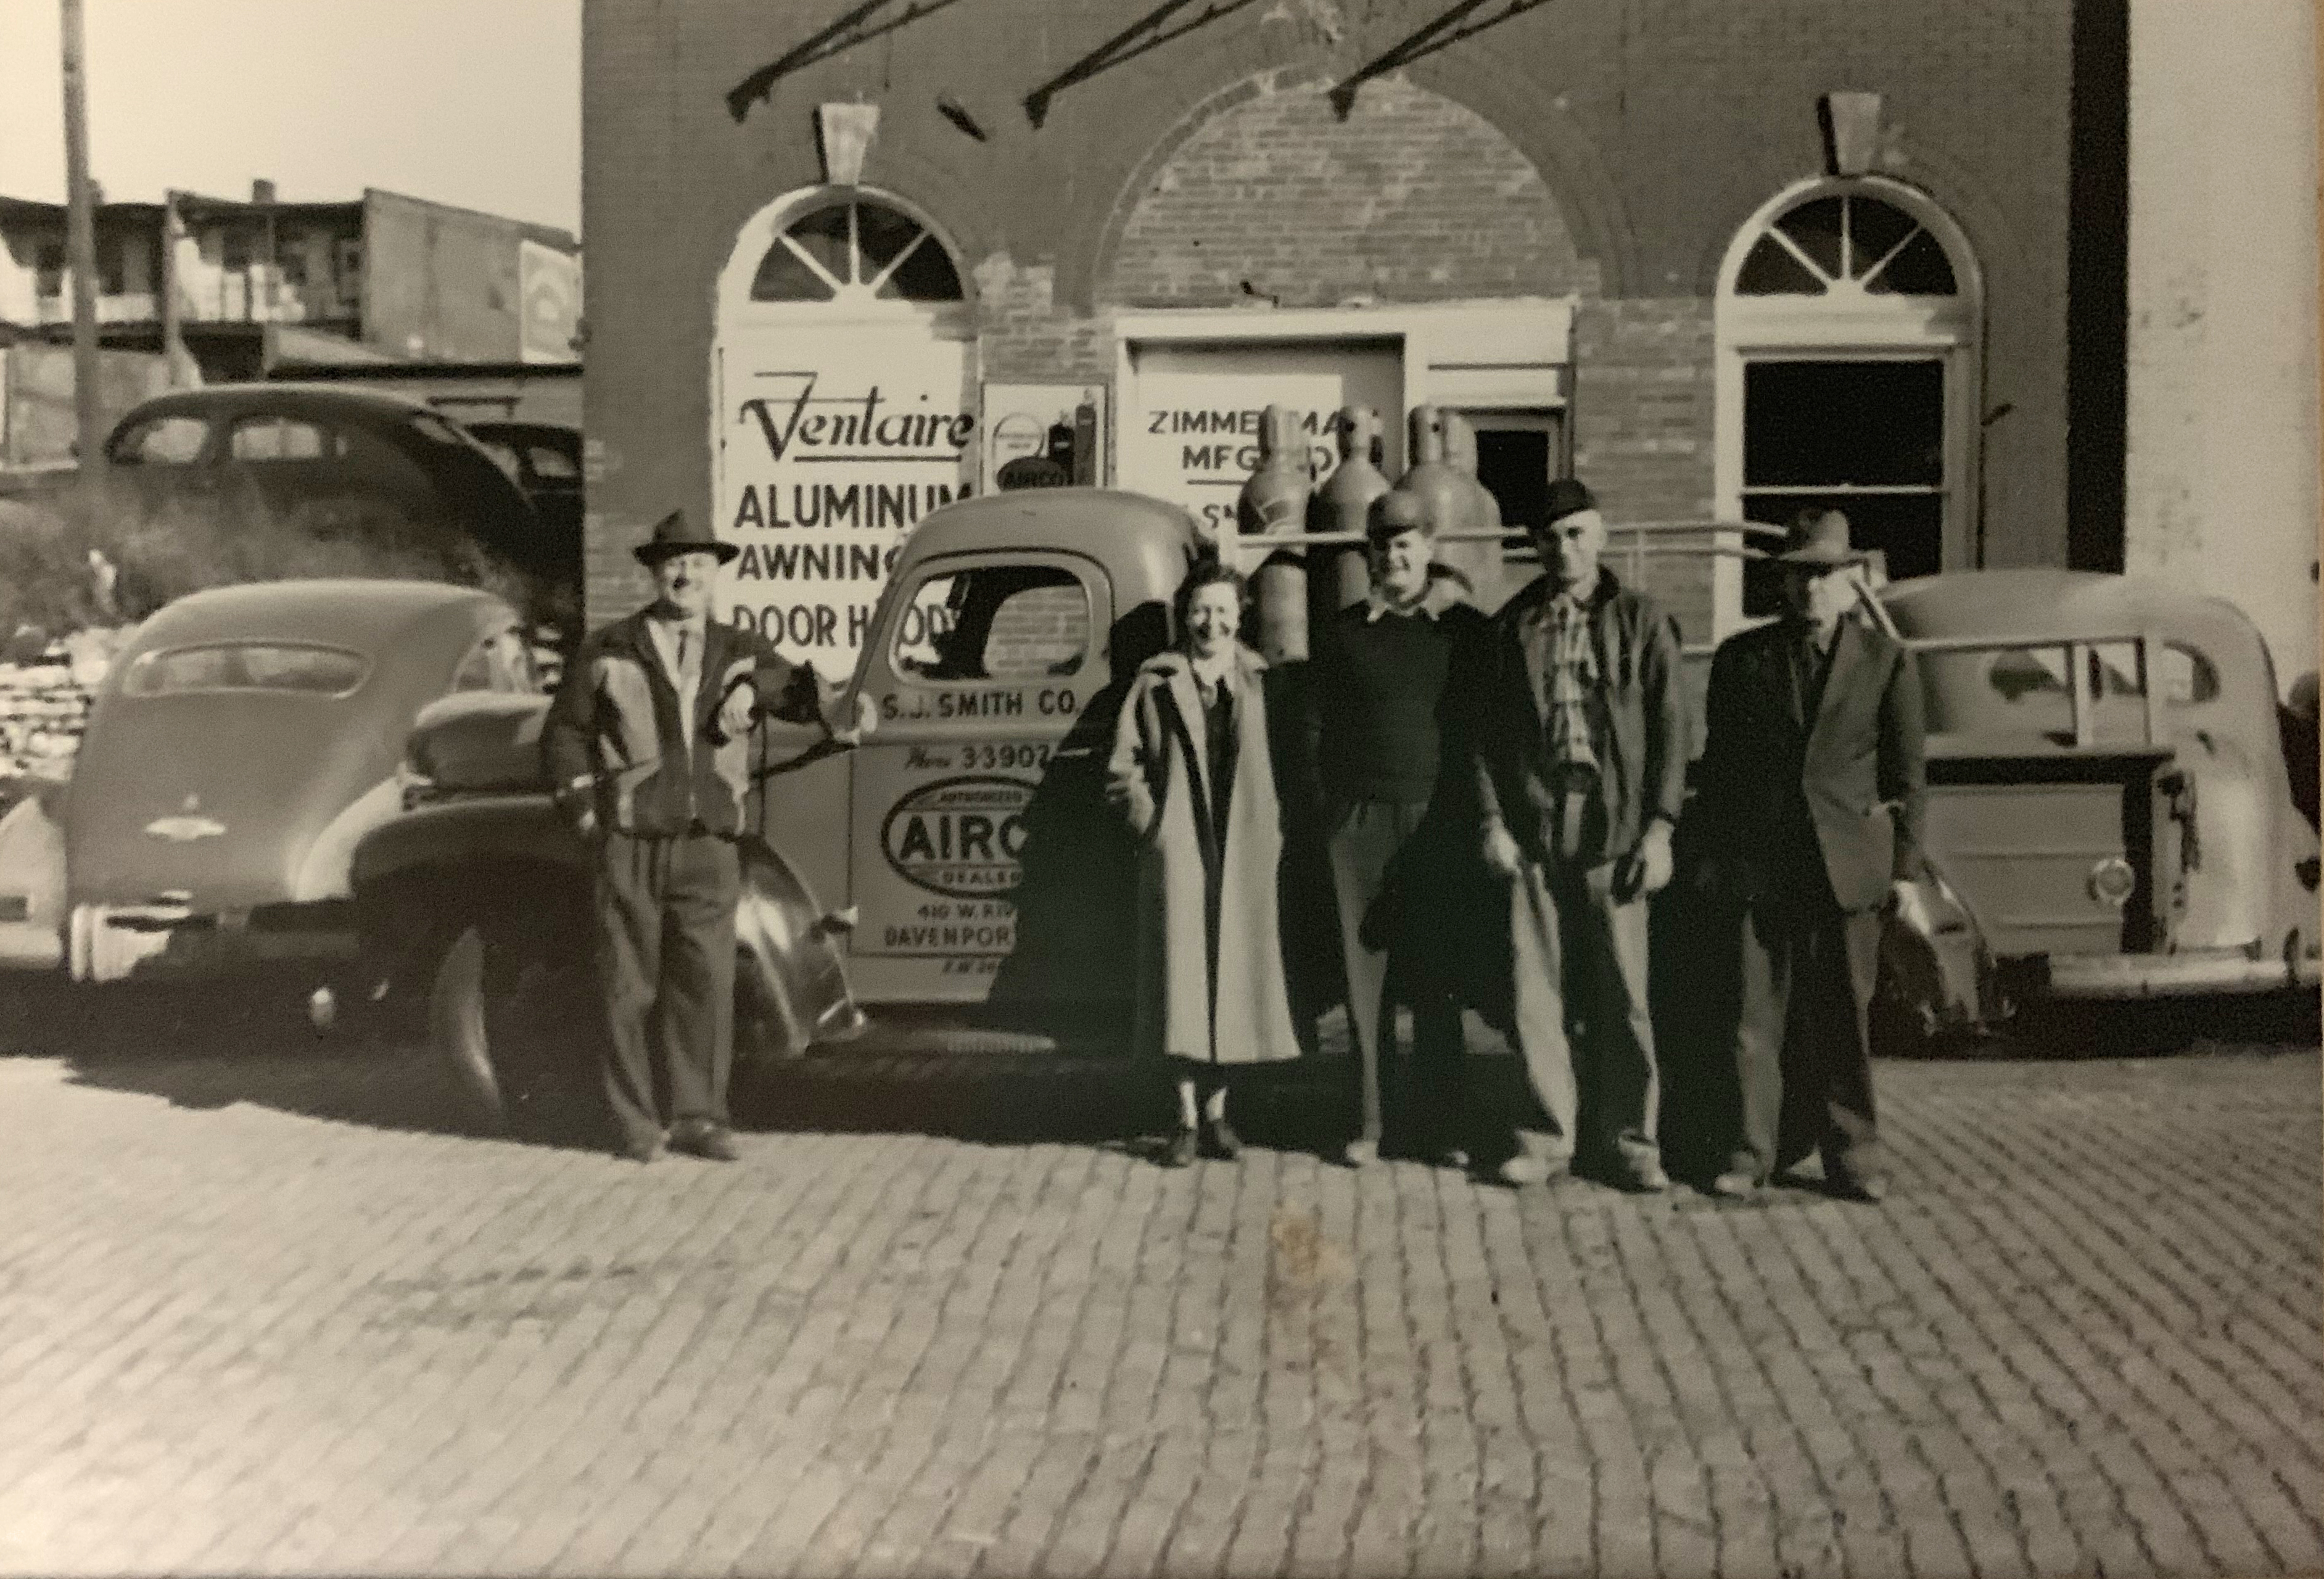 Sylvester "S.J." and Helen Smith, employees, building owner, in front of 1950s S.J. Smith building, truck.